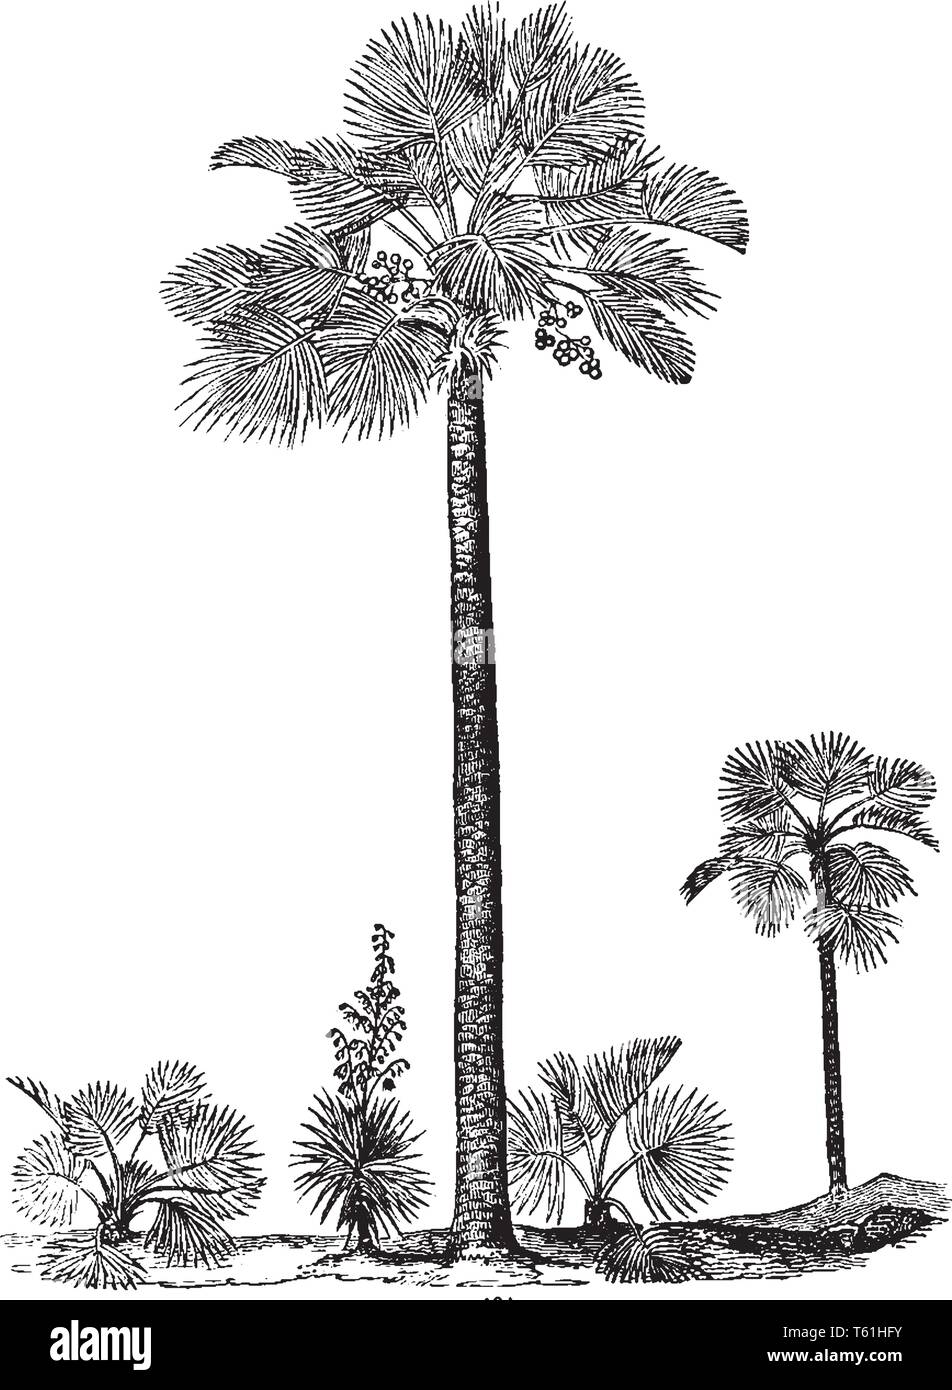 A picture of a palmetto tree which is a fan palm mostly found in the United States, vintage line drawing or engraving illustration. Stock Vector